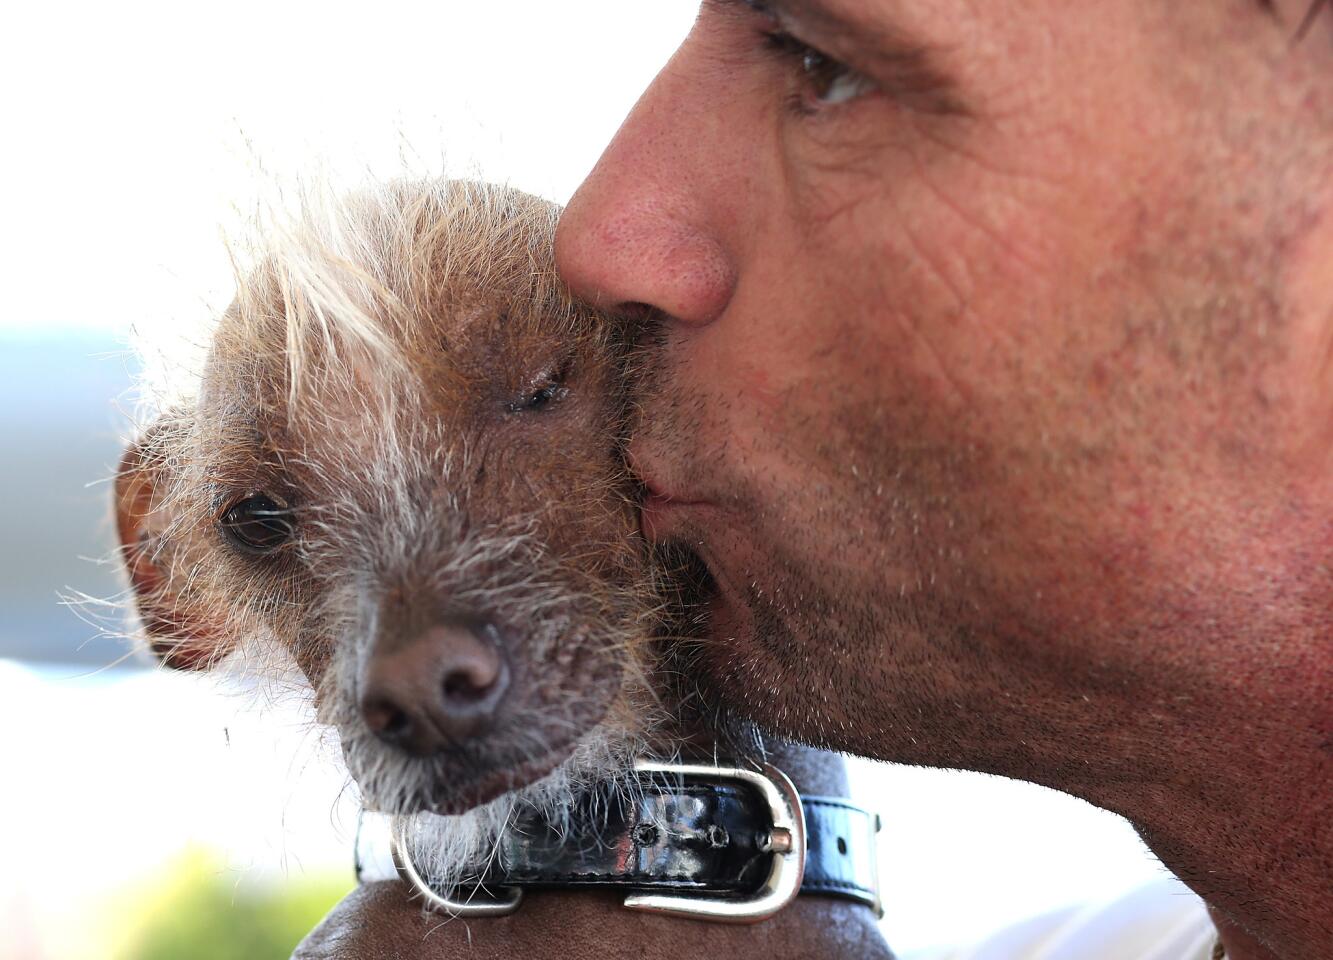 Jon Adler kisses his dog Icky, a Chinese Crested, before the start of the 25th annual World's Ugliest Dog contest at the Sonoma Marin Fair on June 21, 2013 in Petaluma, Calif.